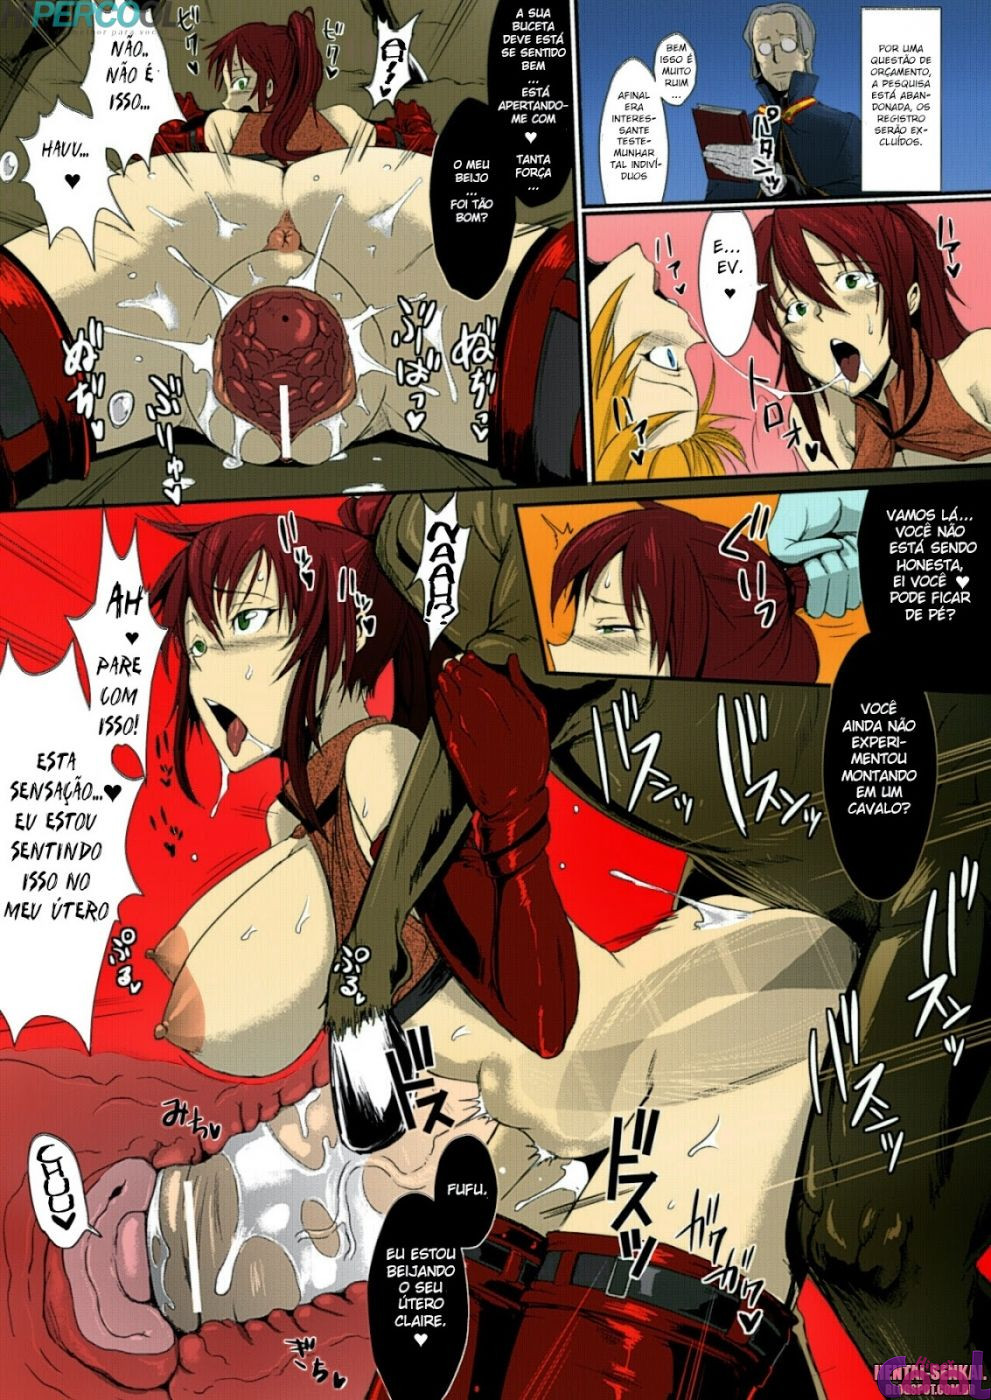 man-eater-colorido-chapter-01-page-13.jpg